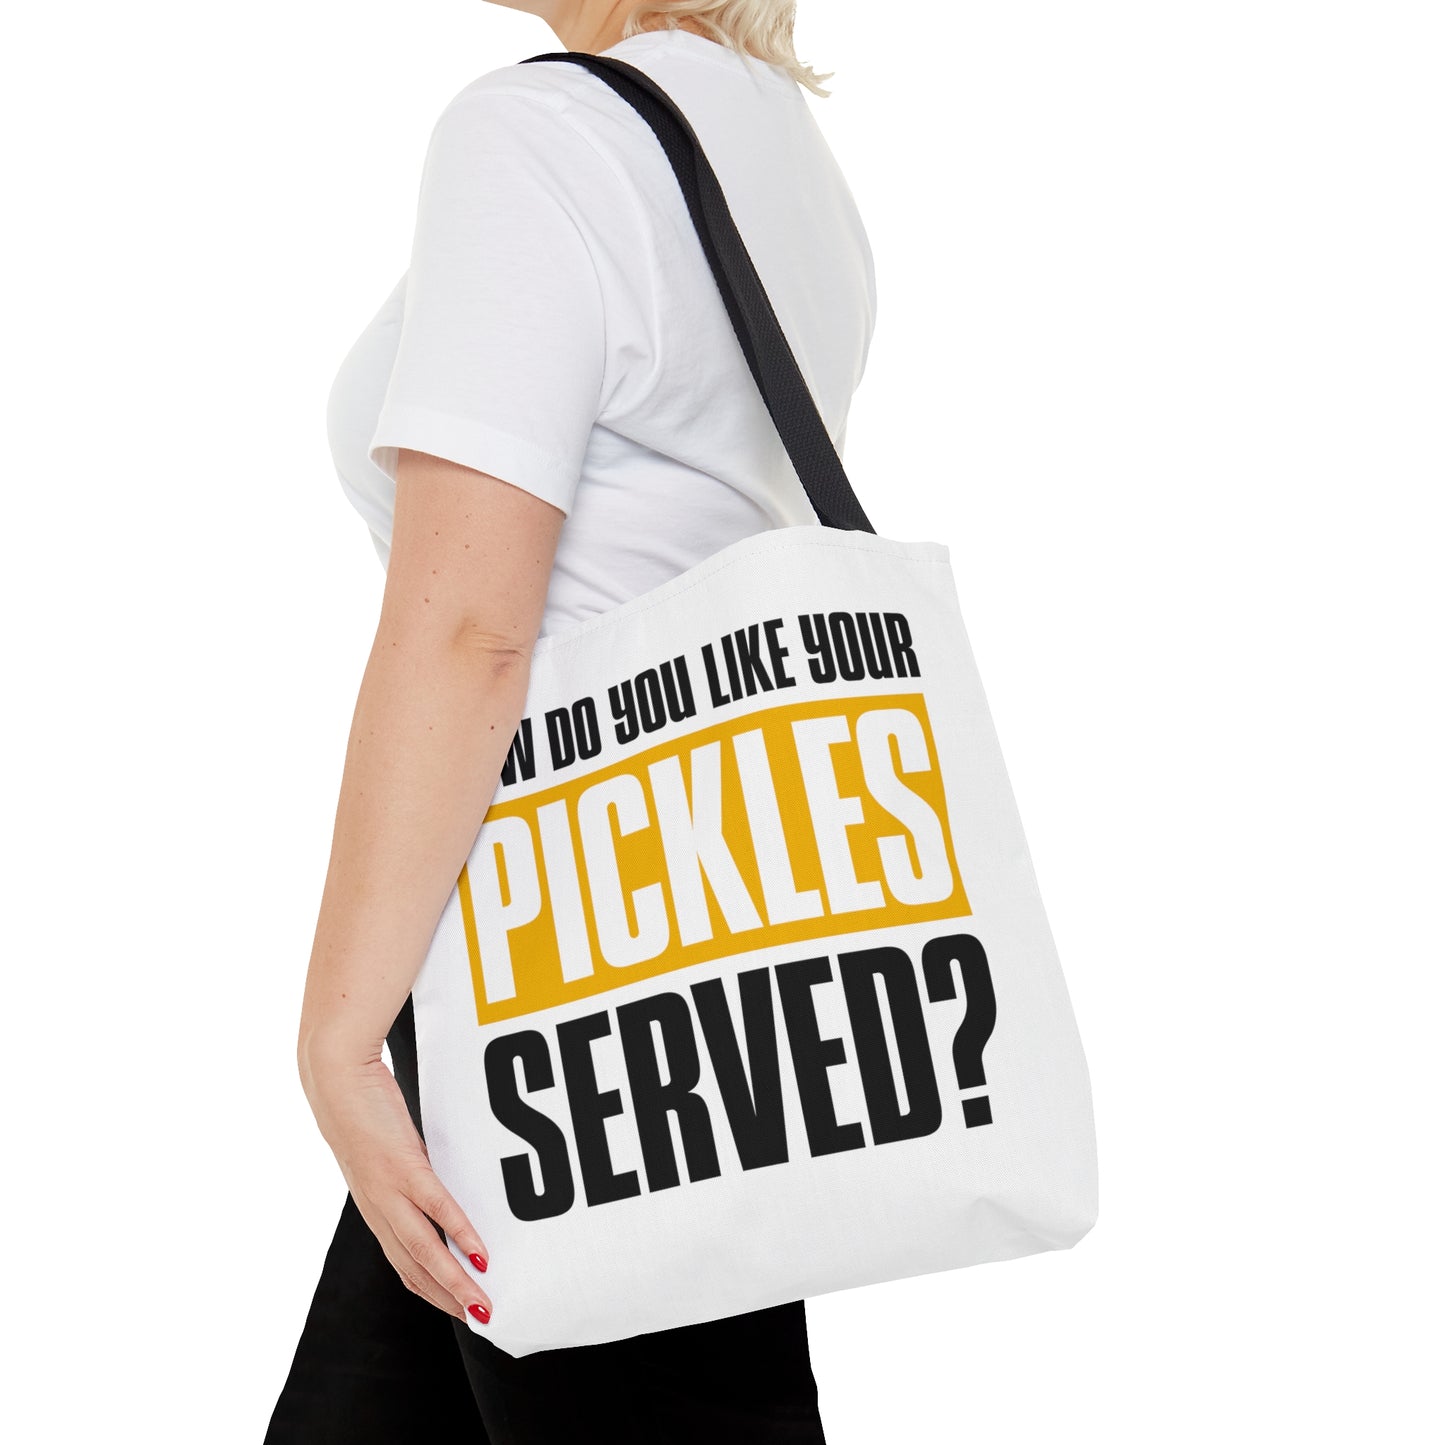 How Do You Like Your Pickles Served?